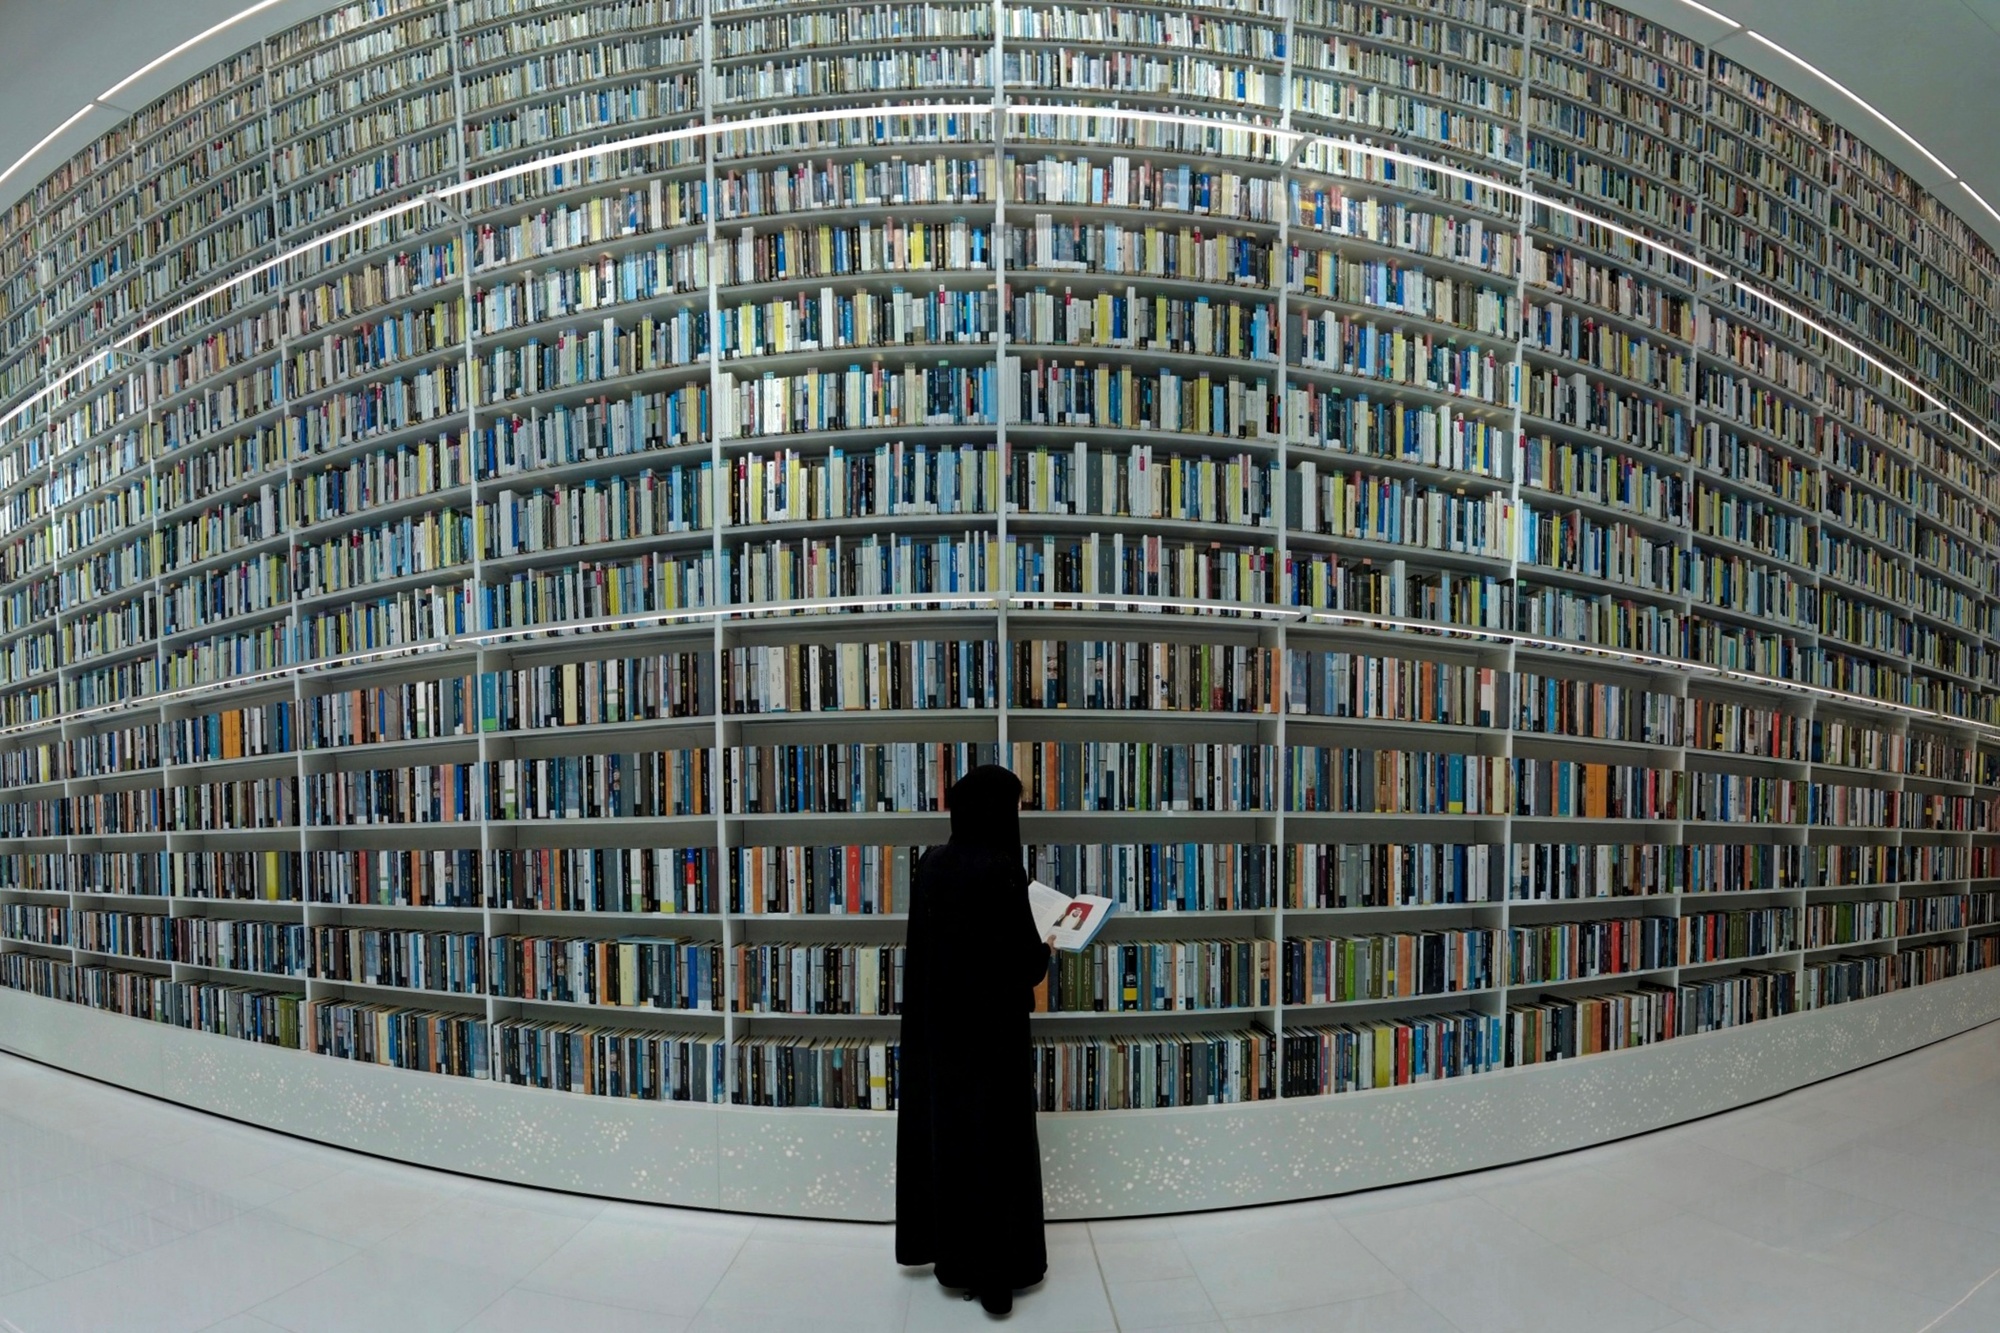 How Many Books Are There in the World?